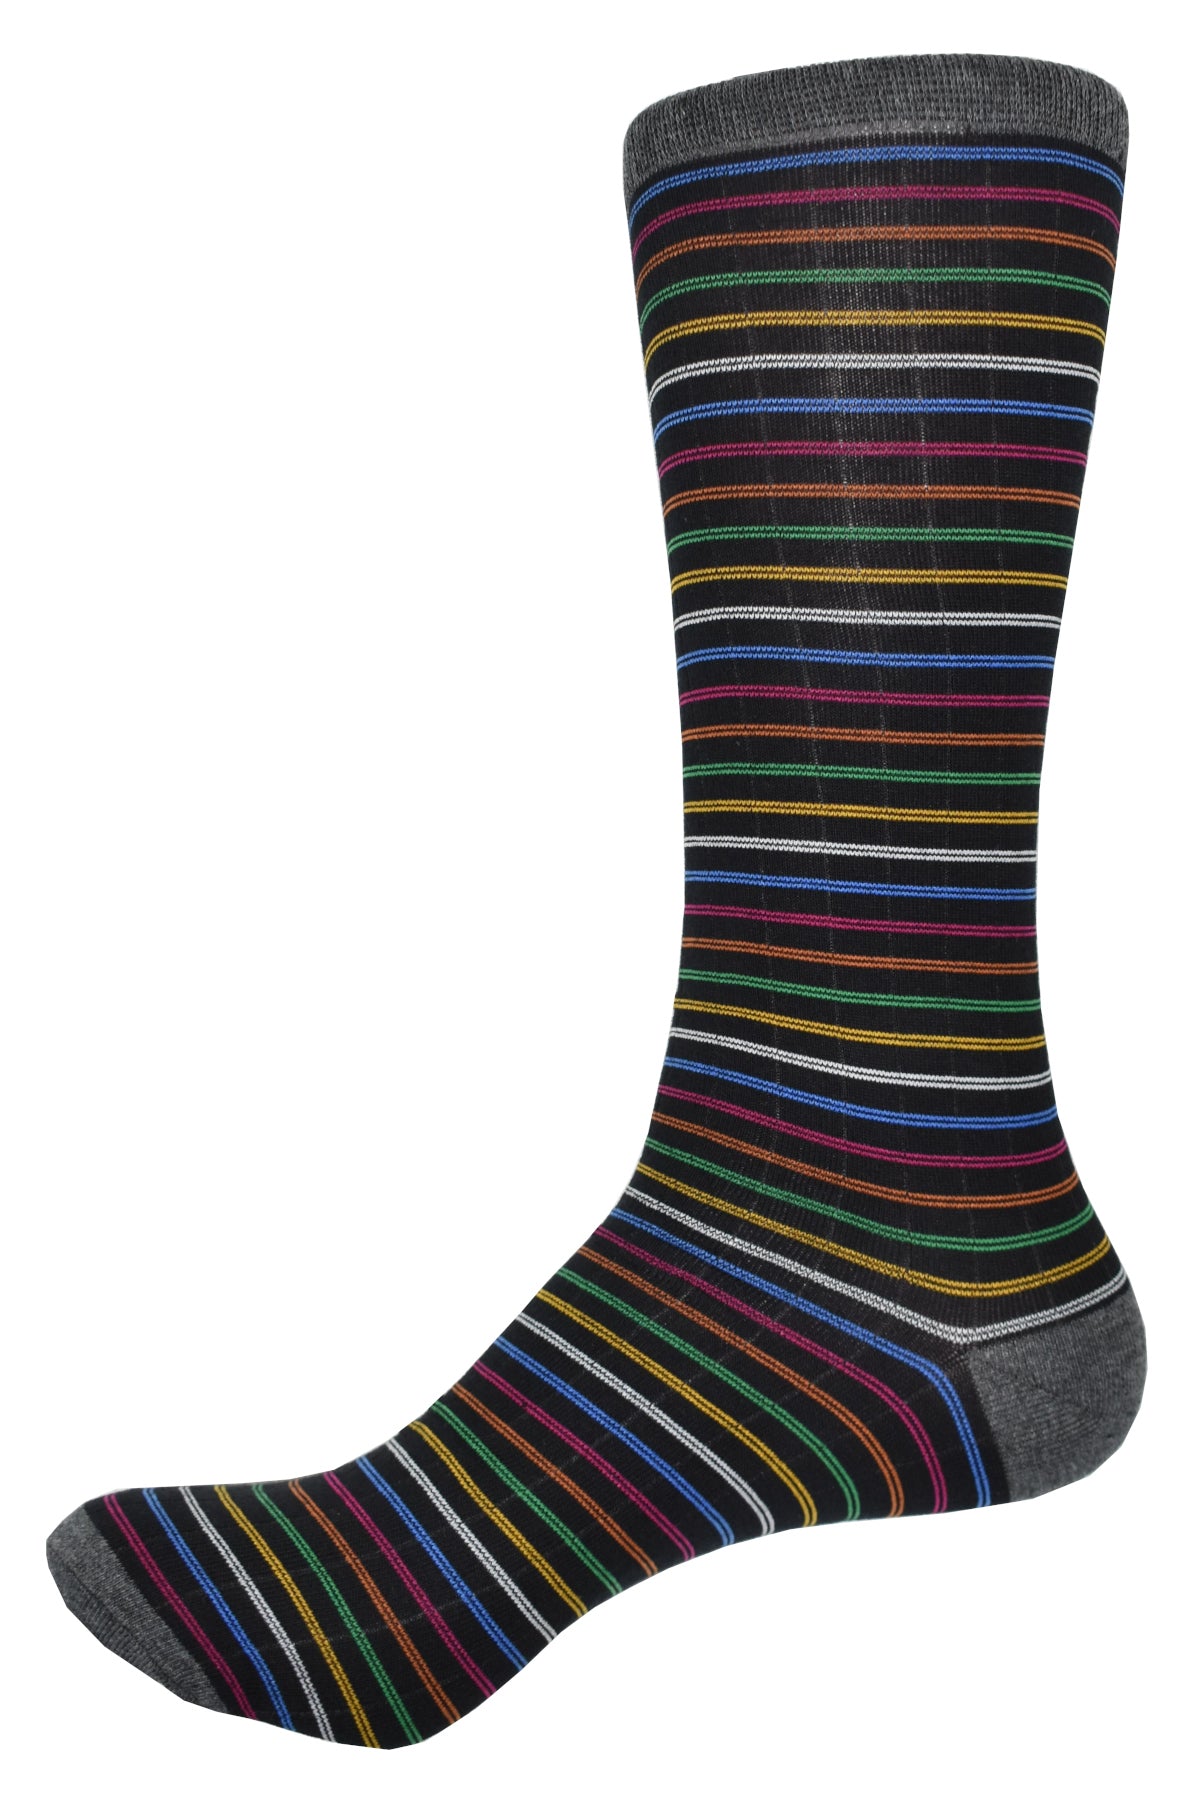 Solid black socks with multiple color fine stripes. Mercerized cotton with lycra for comfort Multi stripes work with any bottoms. Mid calf height. Fits sizes 9-11.